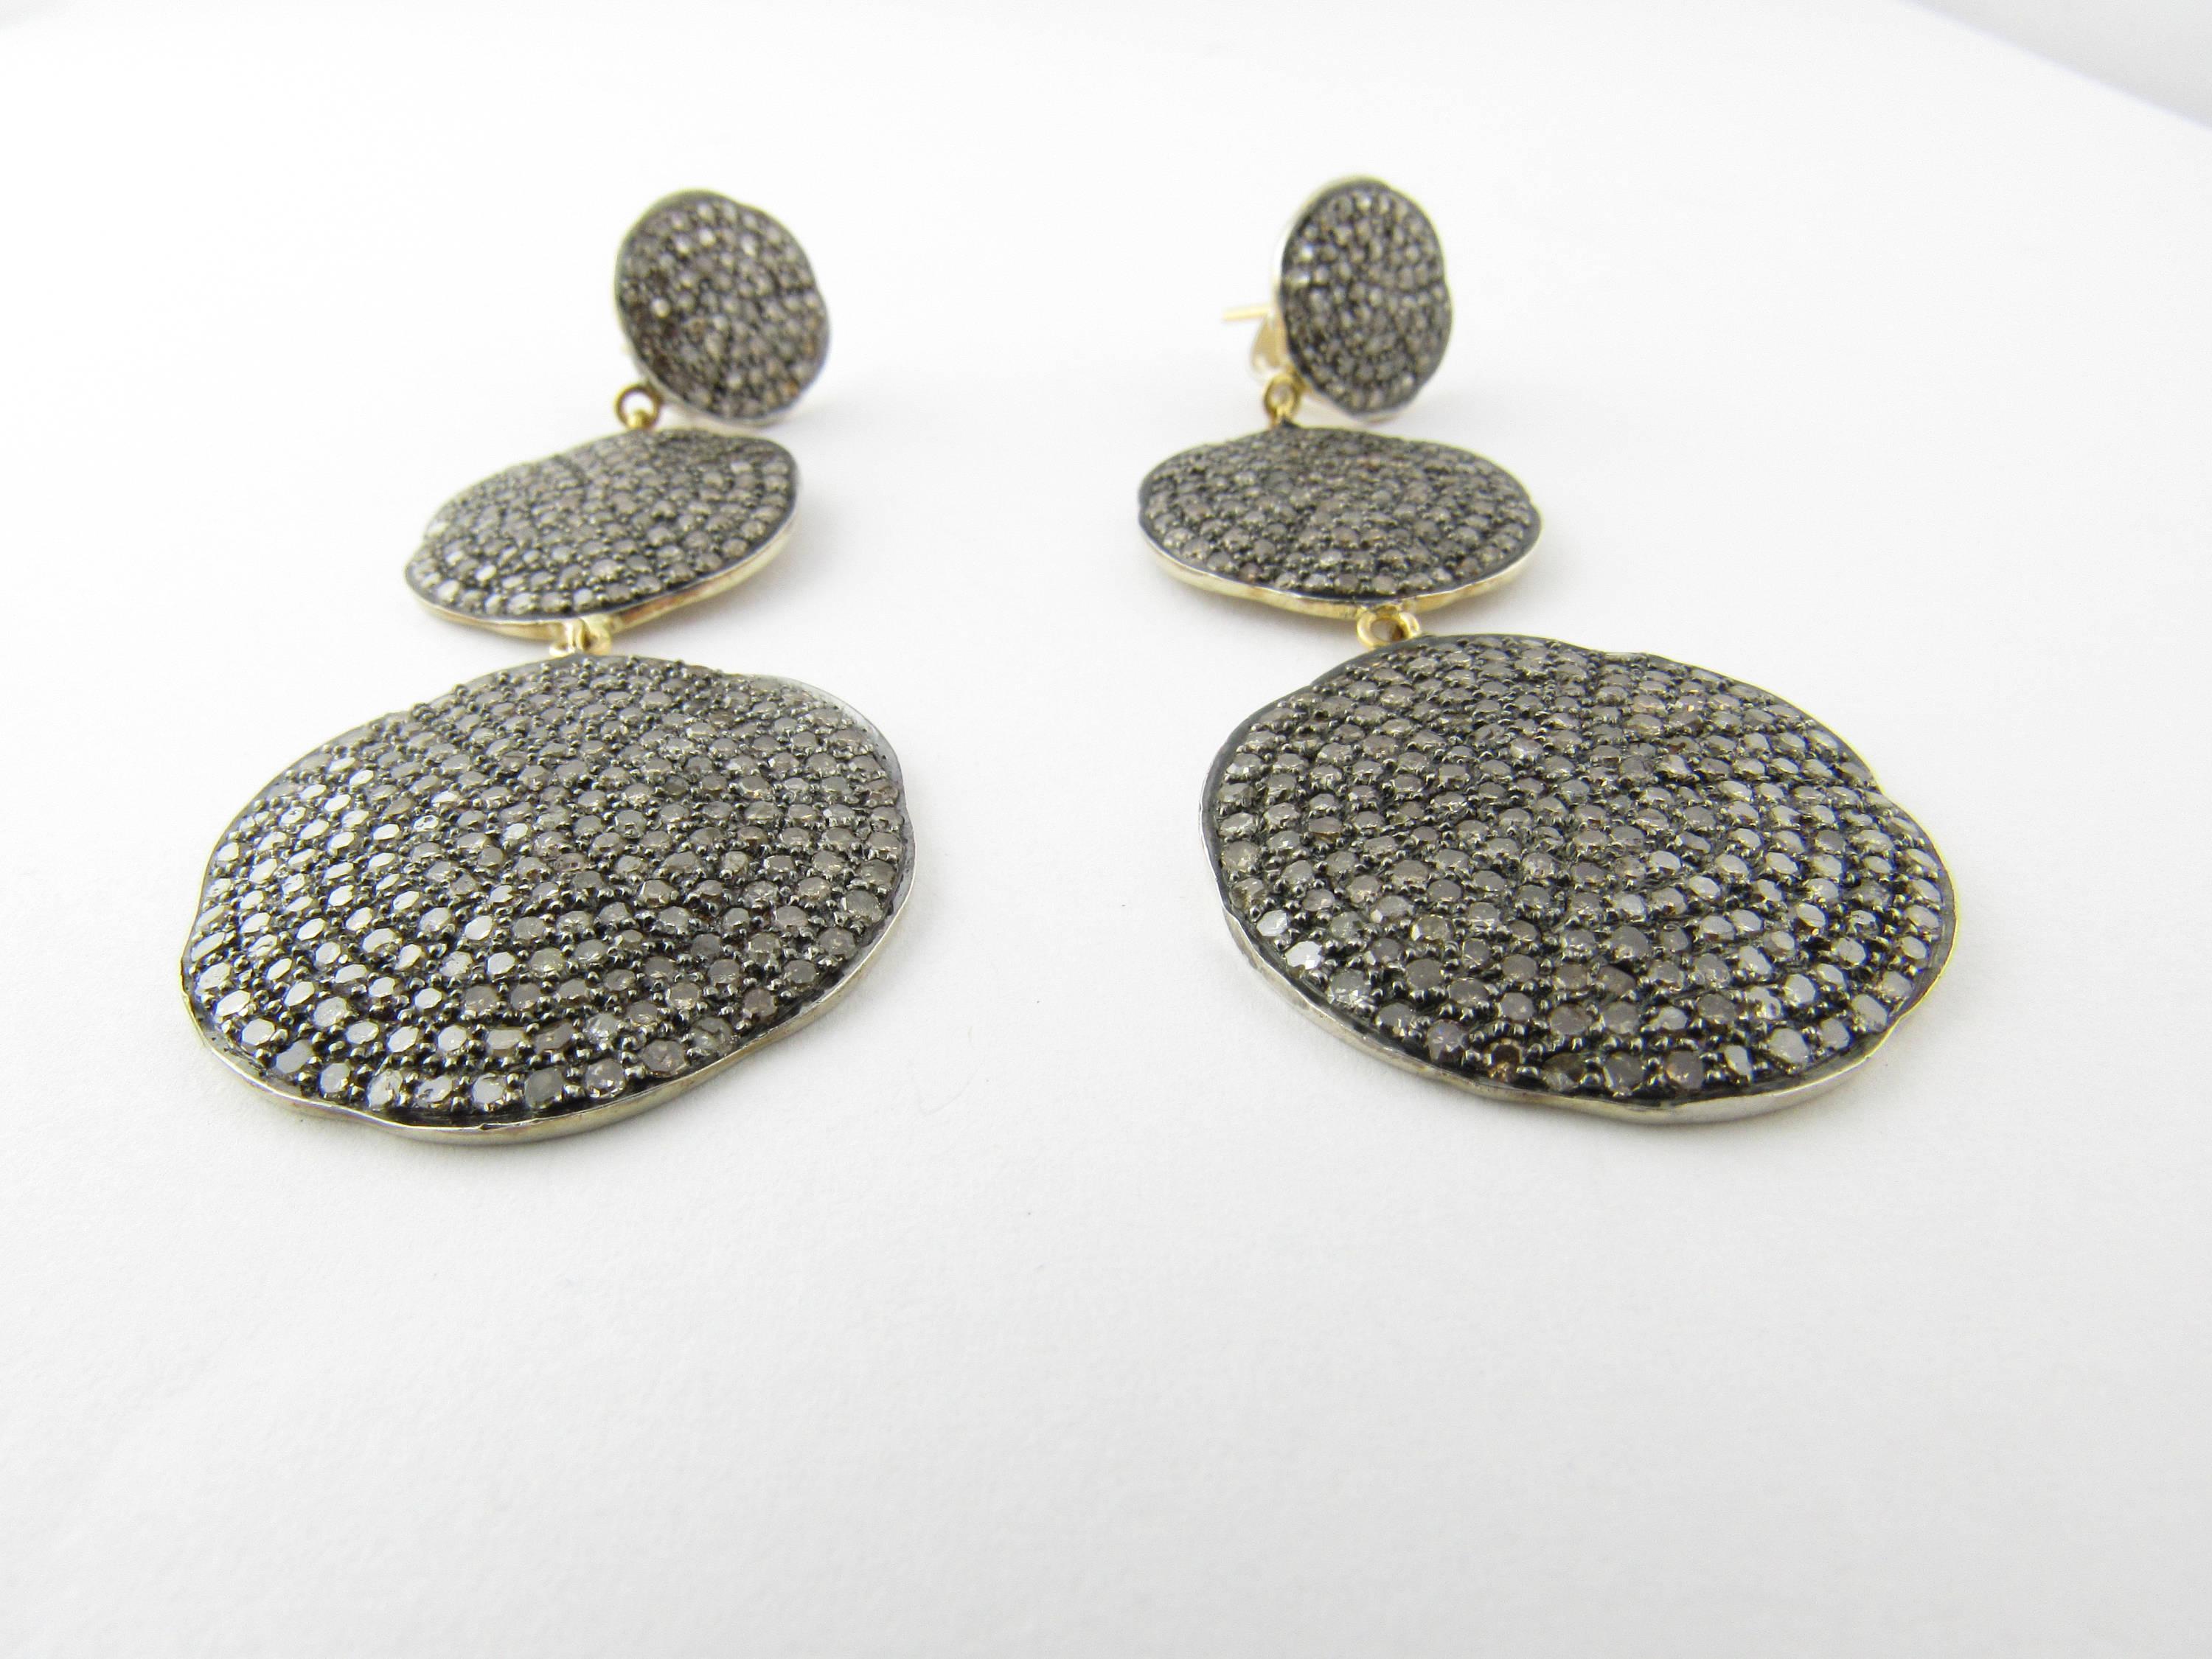 Vintage Sterling Silver Diamond Pave Dangle Earrings 
These gorgeous dangle earrings each feature 299 single cut diamonds pave set in three vertical sterling silver discs (12 mm, 18 mm, 25 mm). Beautifully designed. 
Approximate total diamond